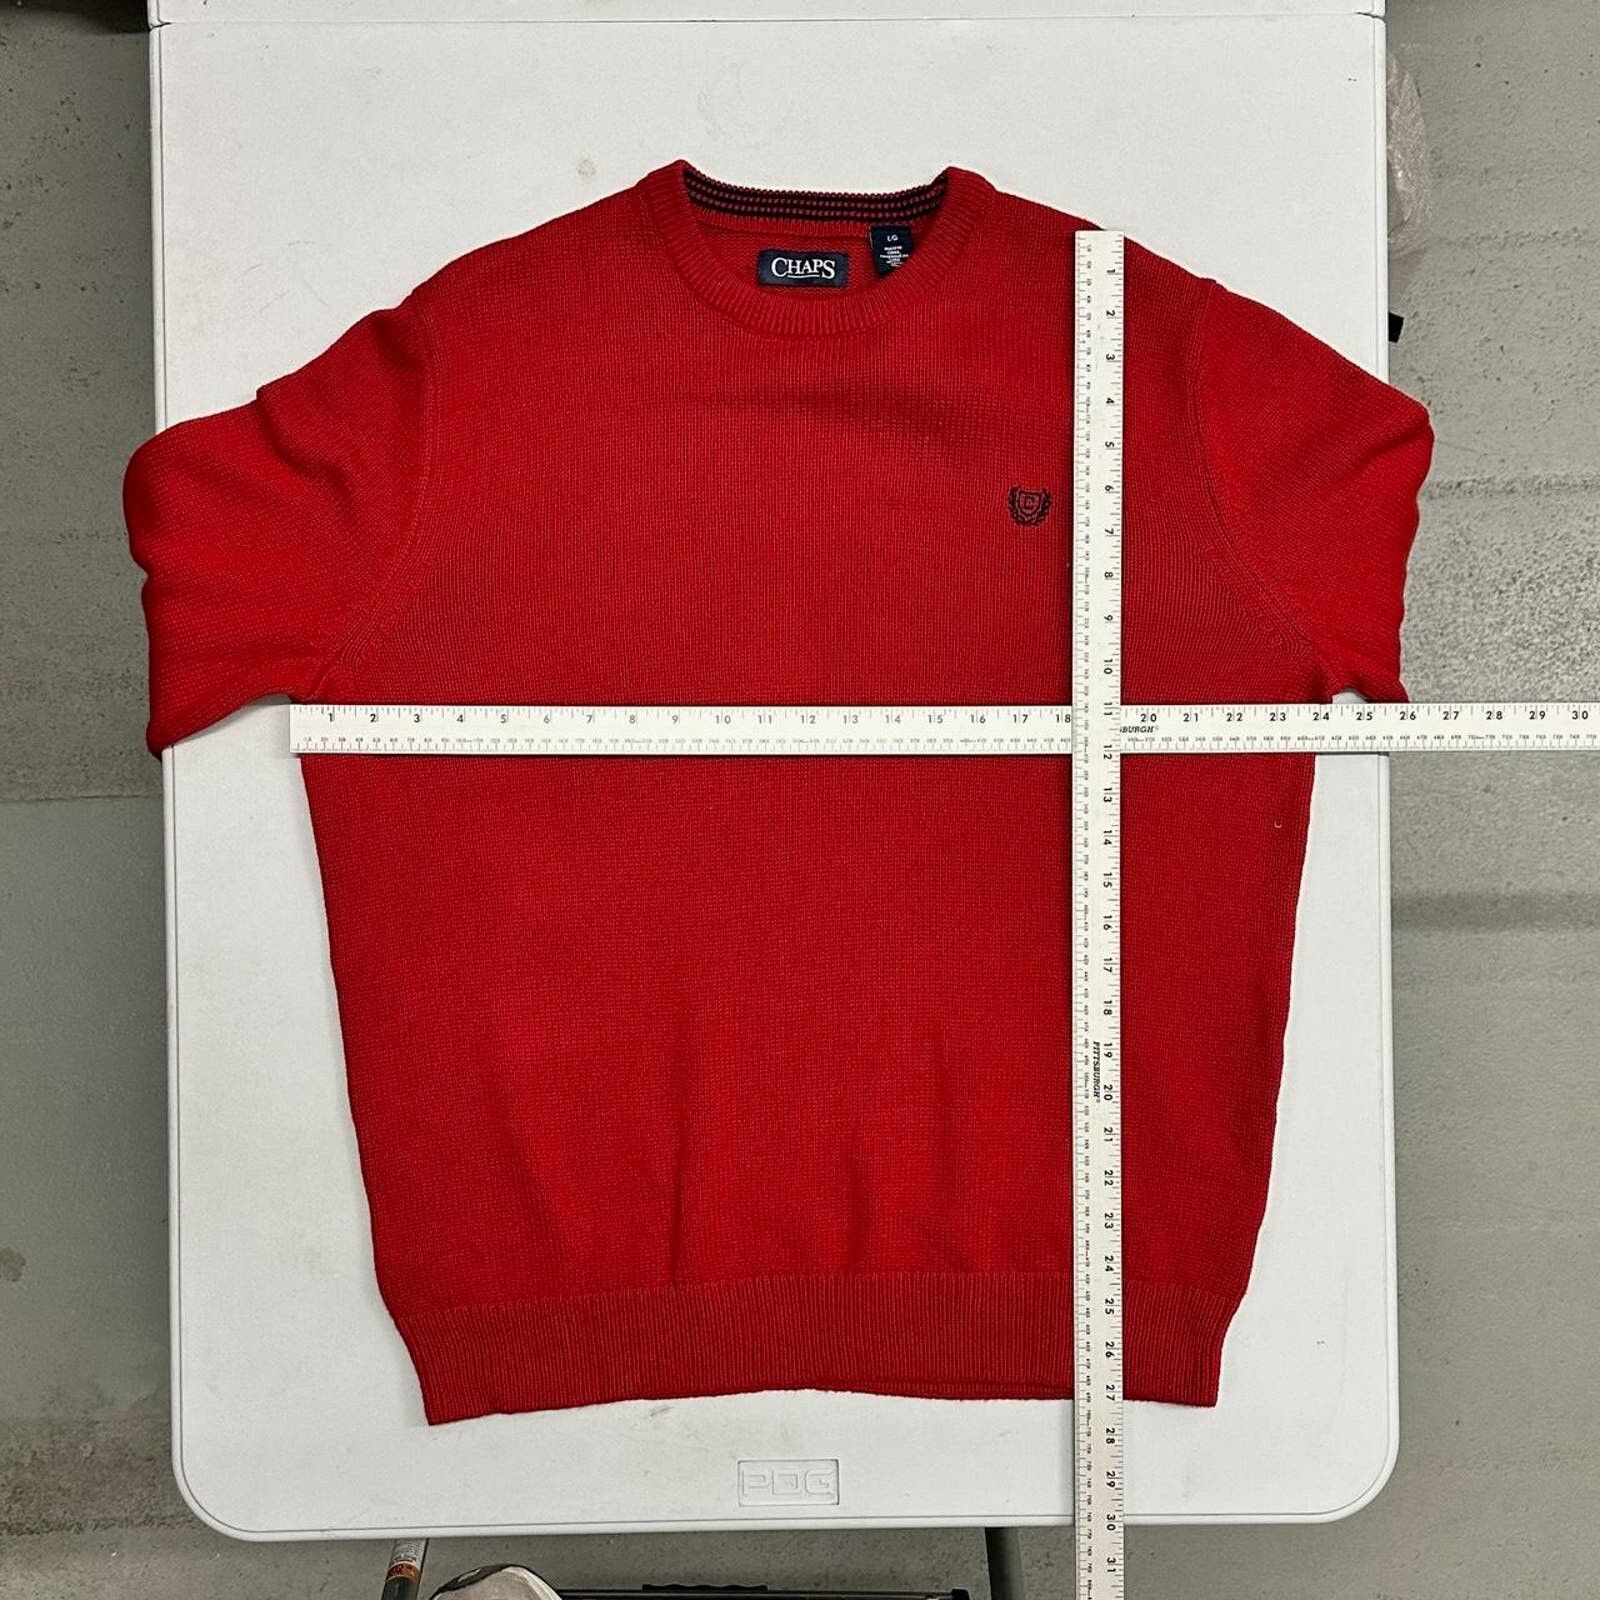 Chaps Vintage 1990’s Chaps Red Knitted Crewneck Sweater Mens Large Size US L / EU 52-54 / 3 - 4 Preview